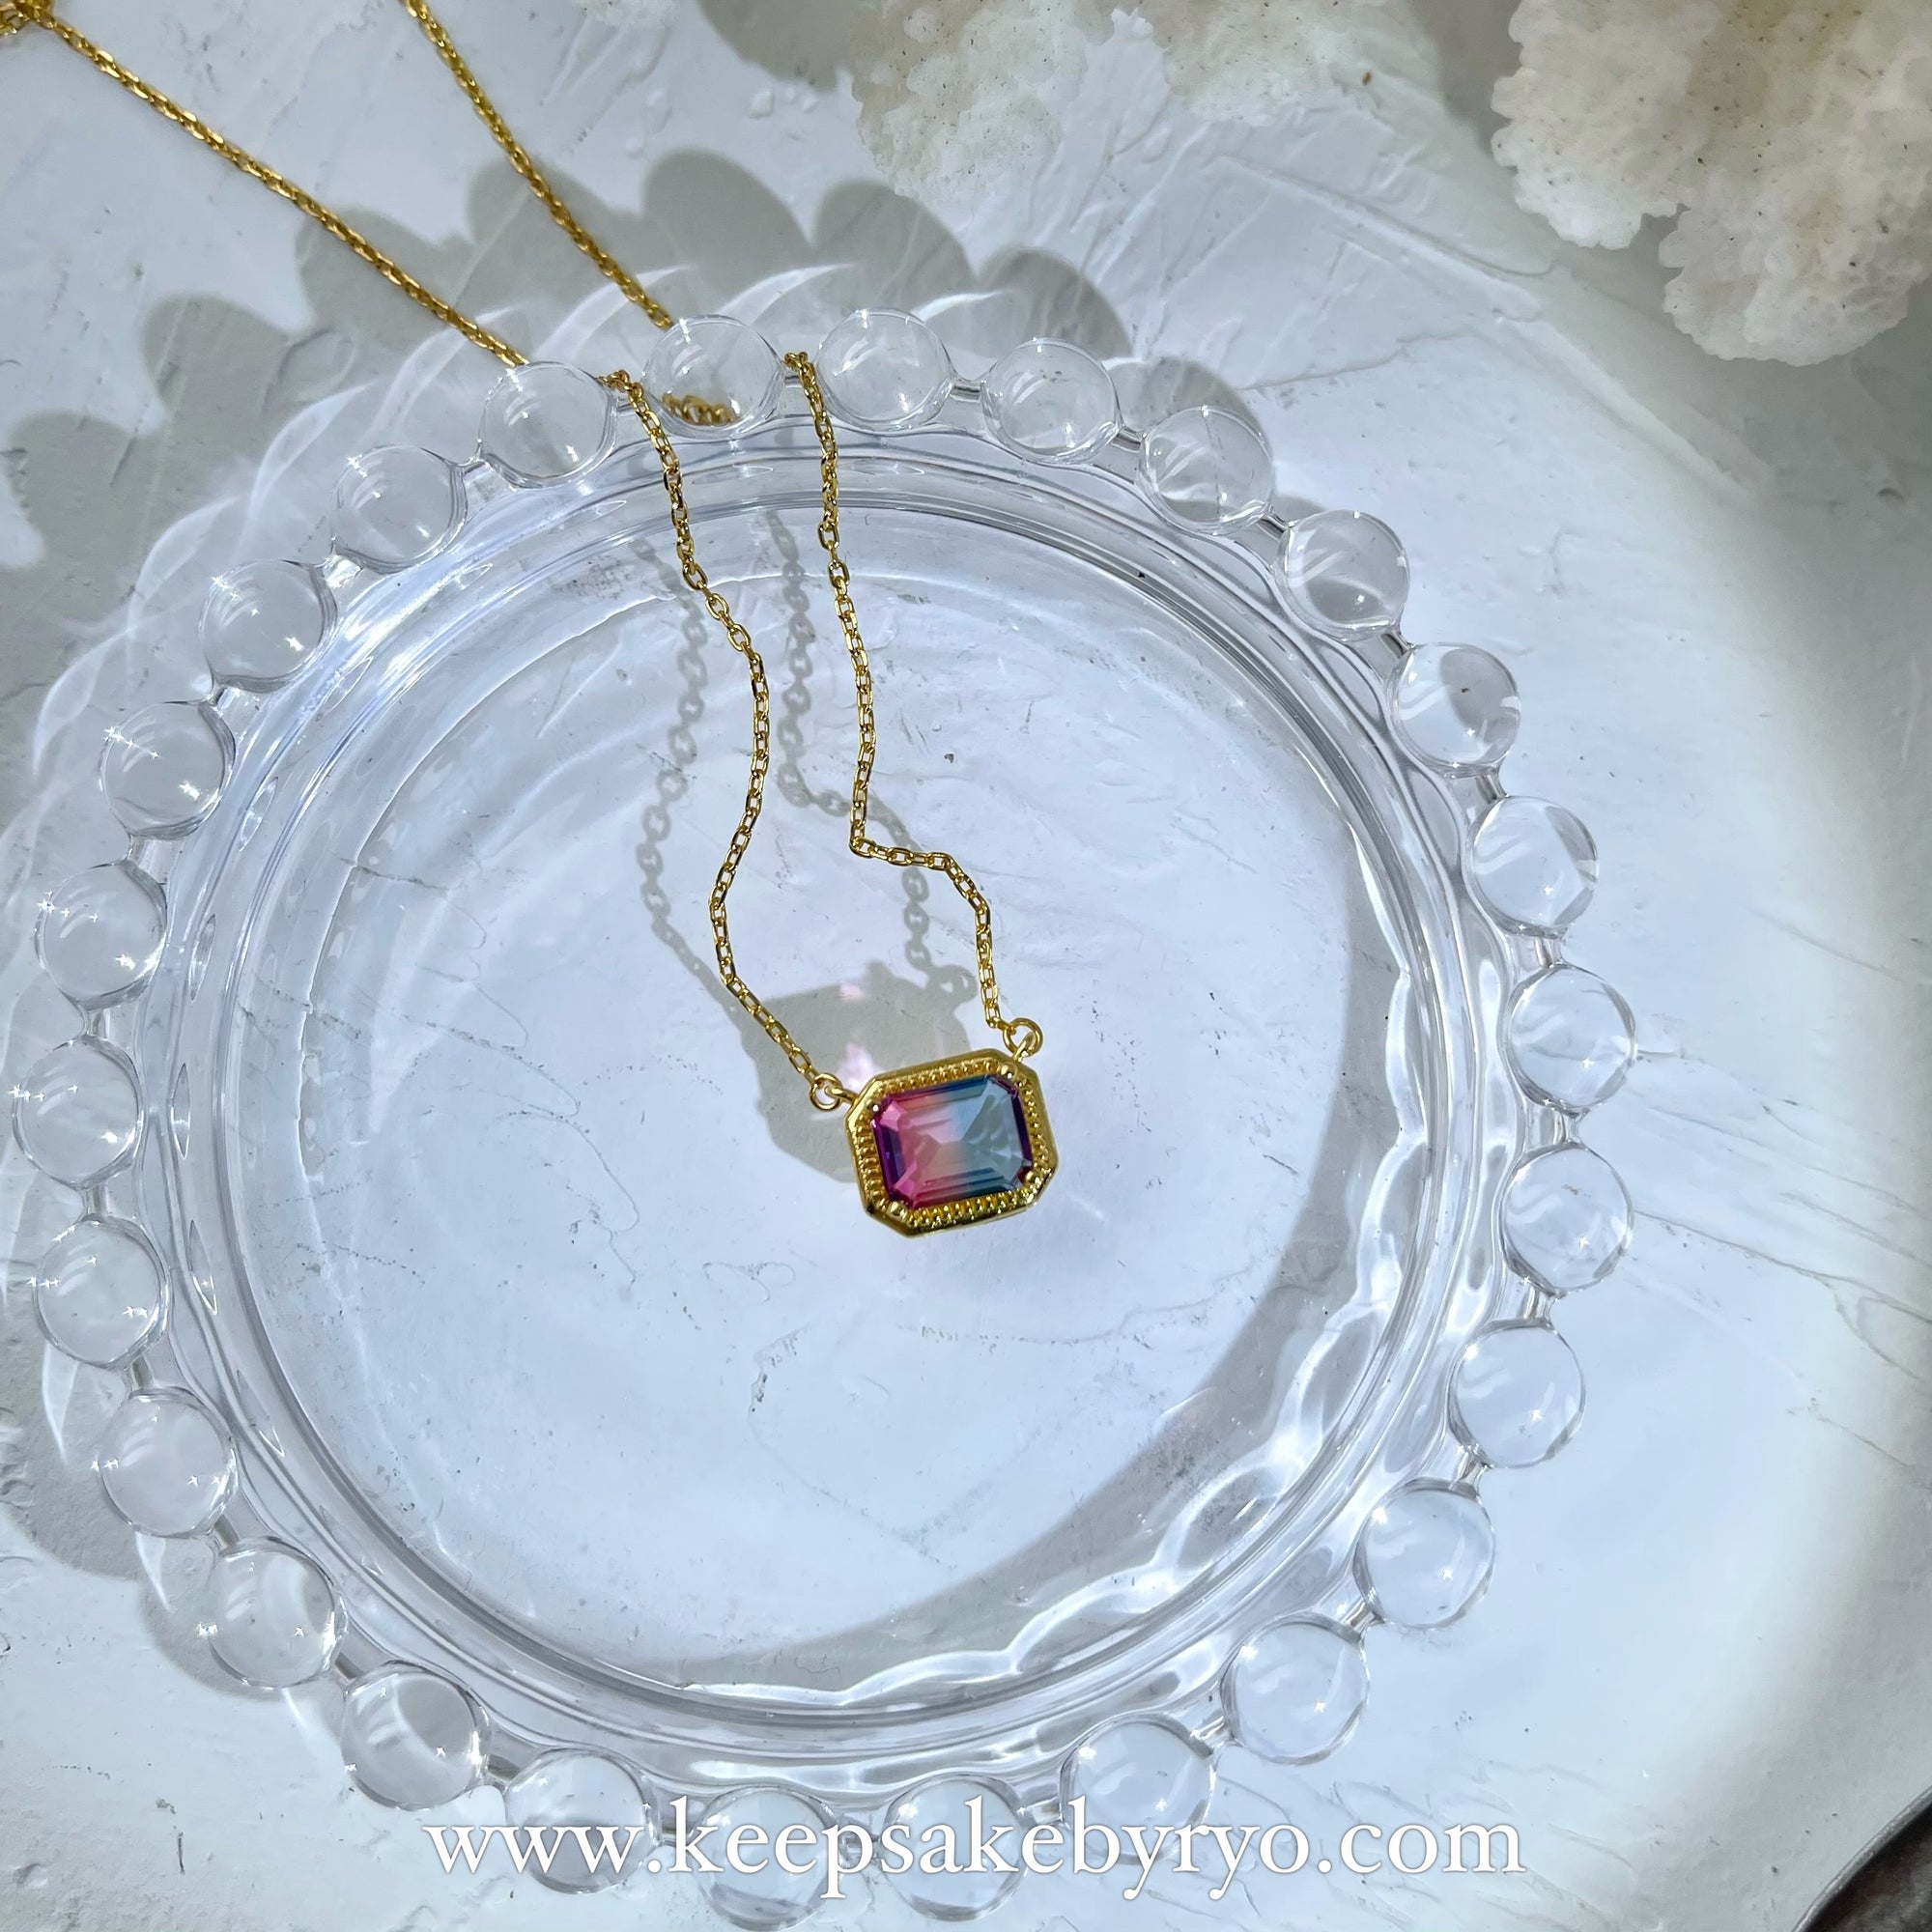 KEEPLETS COLLECTION: MERMAID TOURMALINE NECKLACE